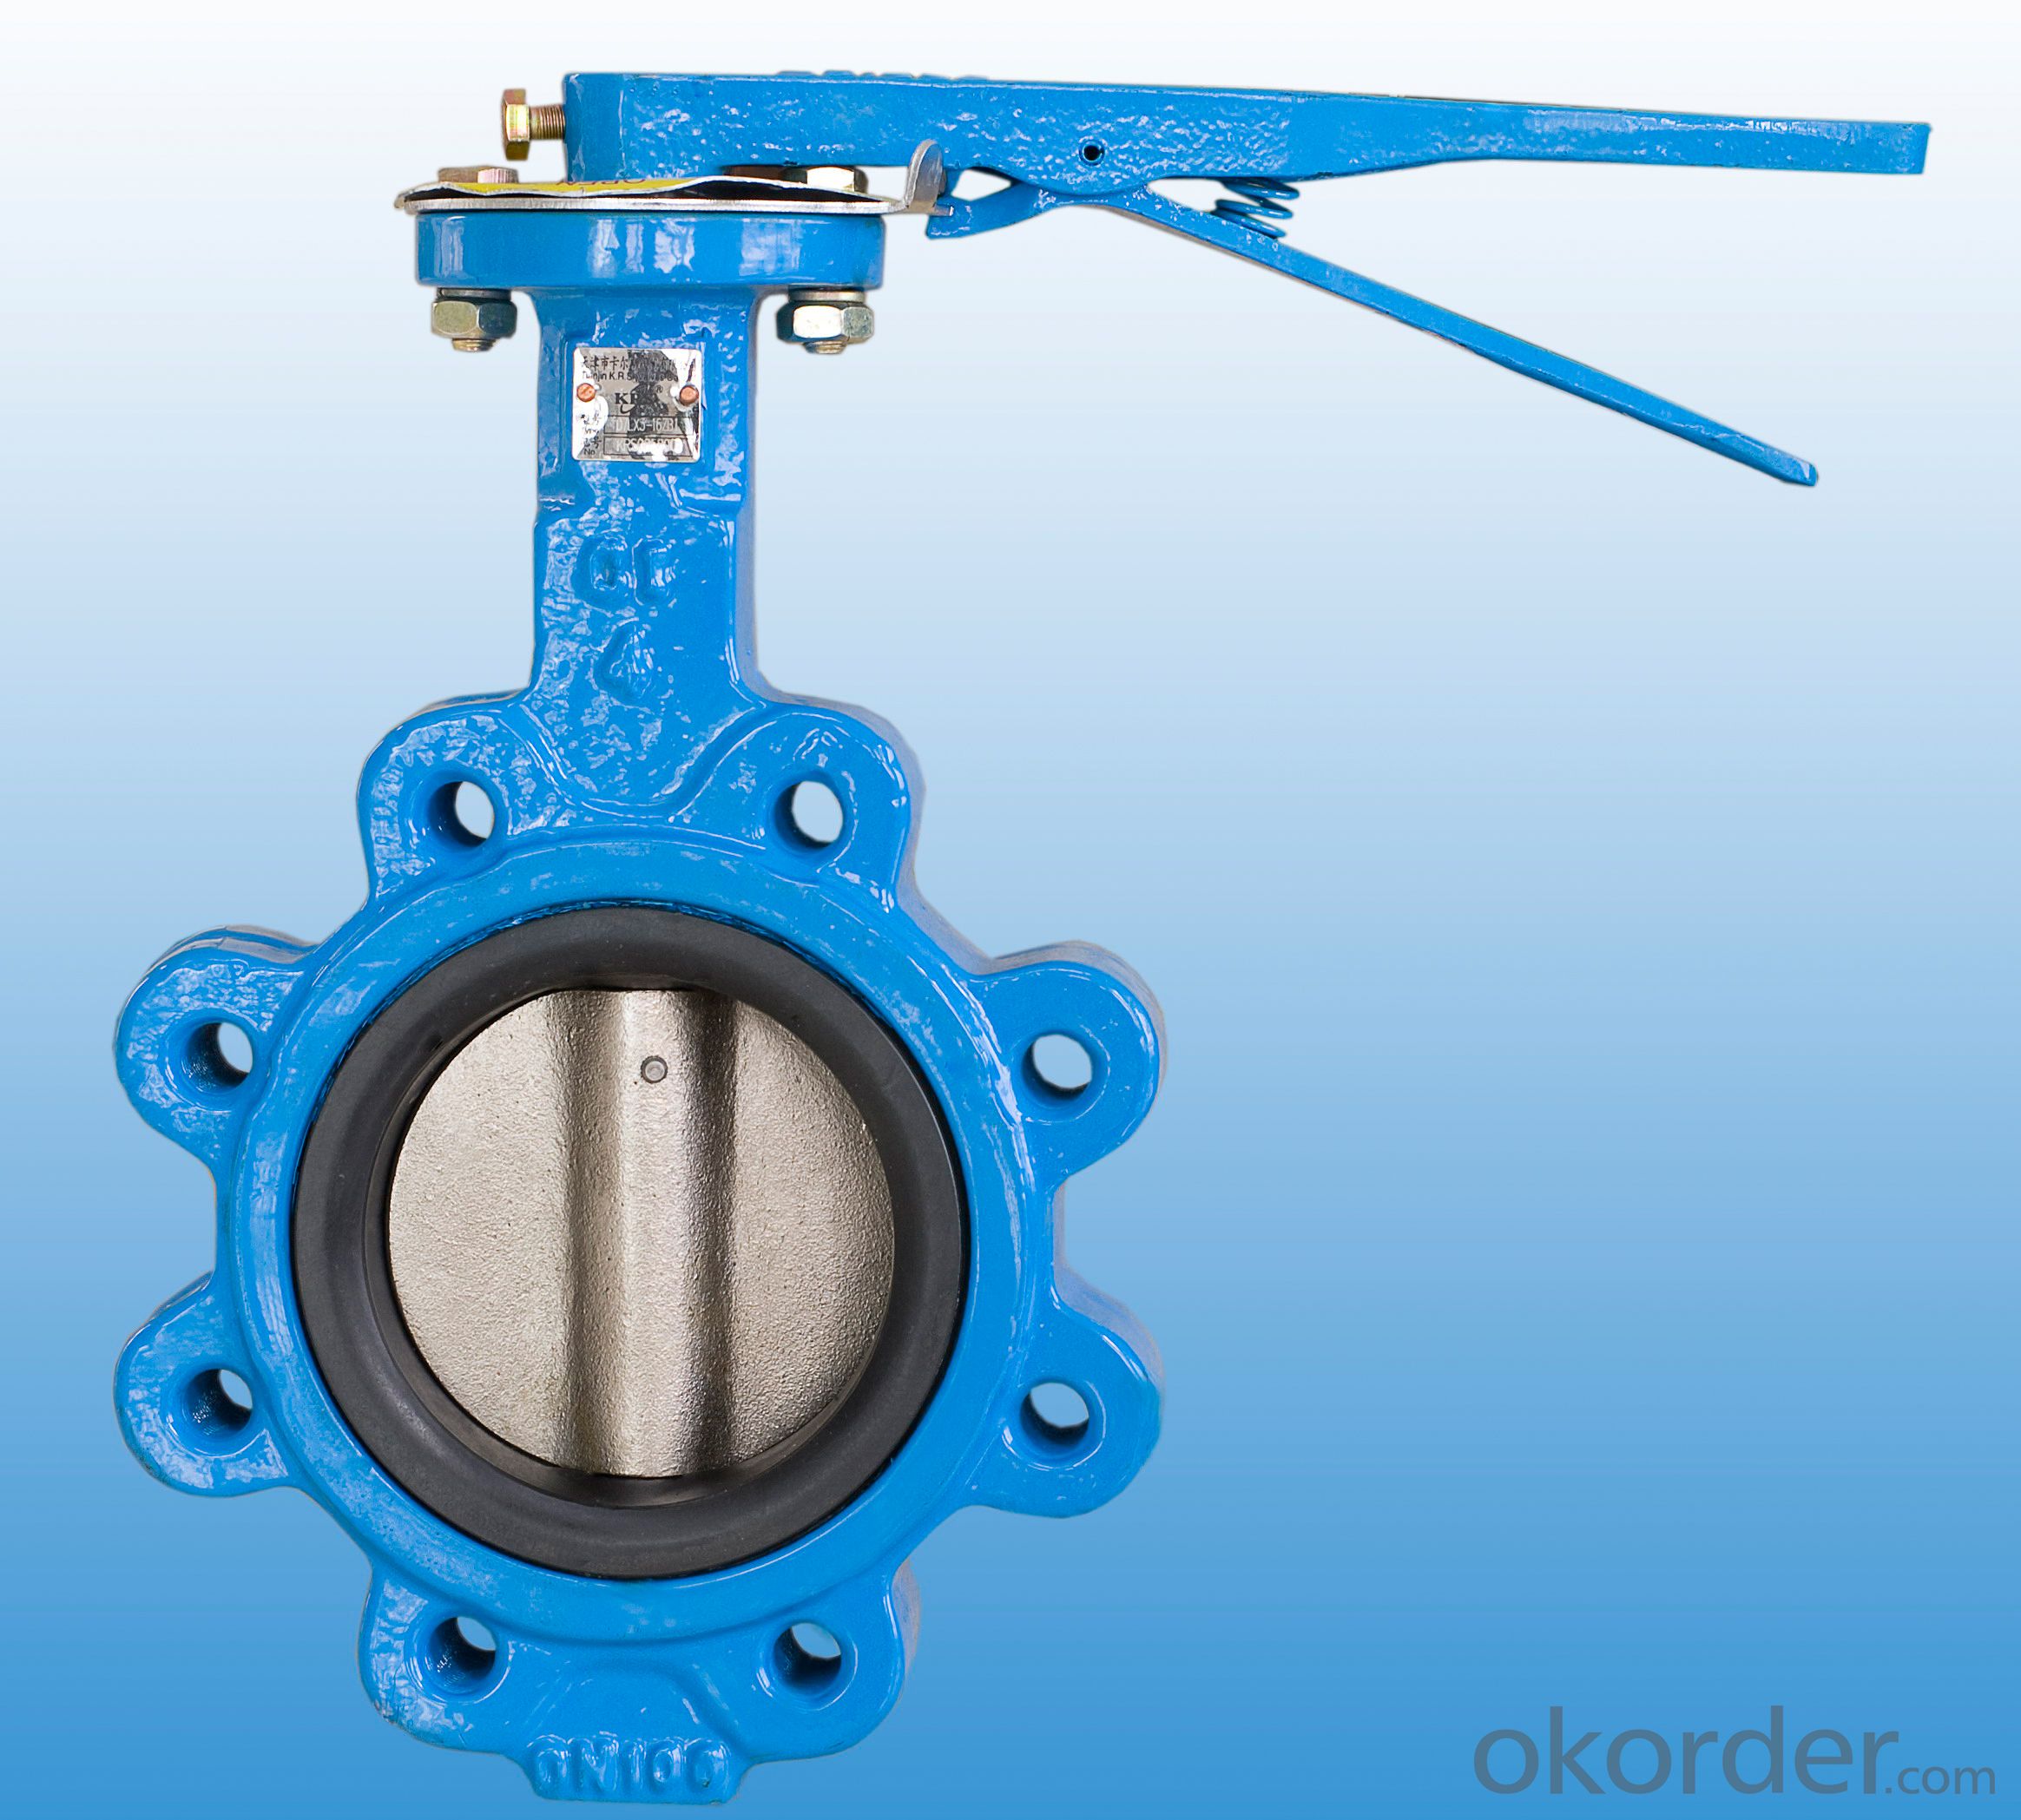 Lug type butterfly valve real-time quotes, last-sale prices -Okorder.com